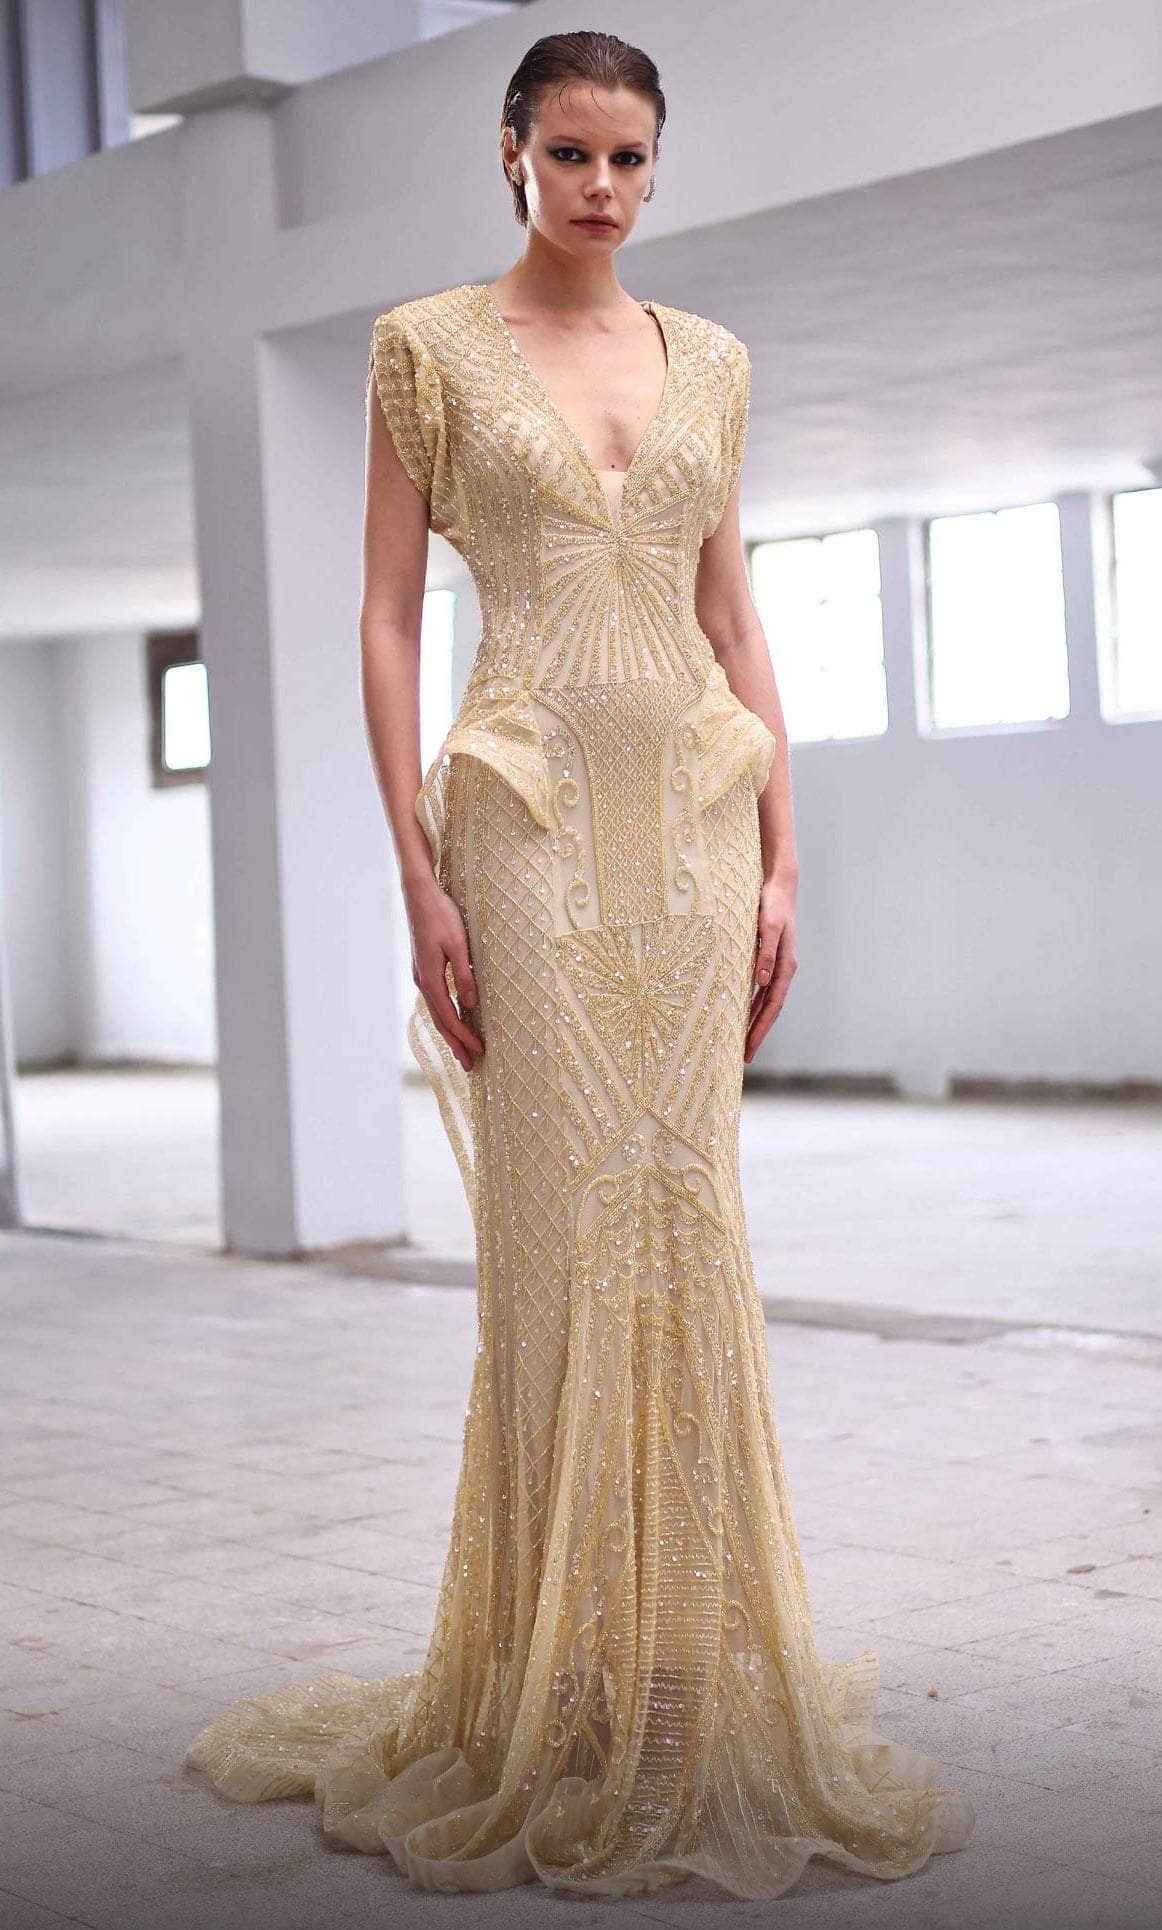 Image of MNM Couture M1004 - Sheath Full Length Embellished Gown